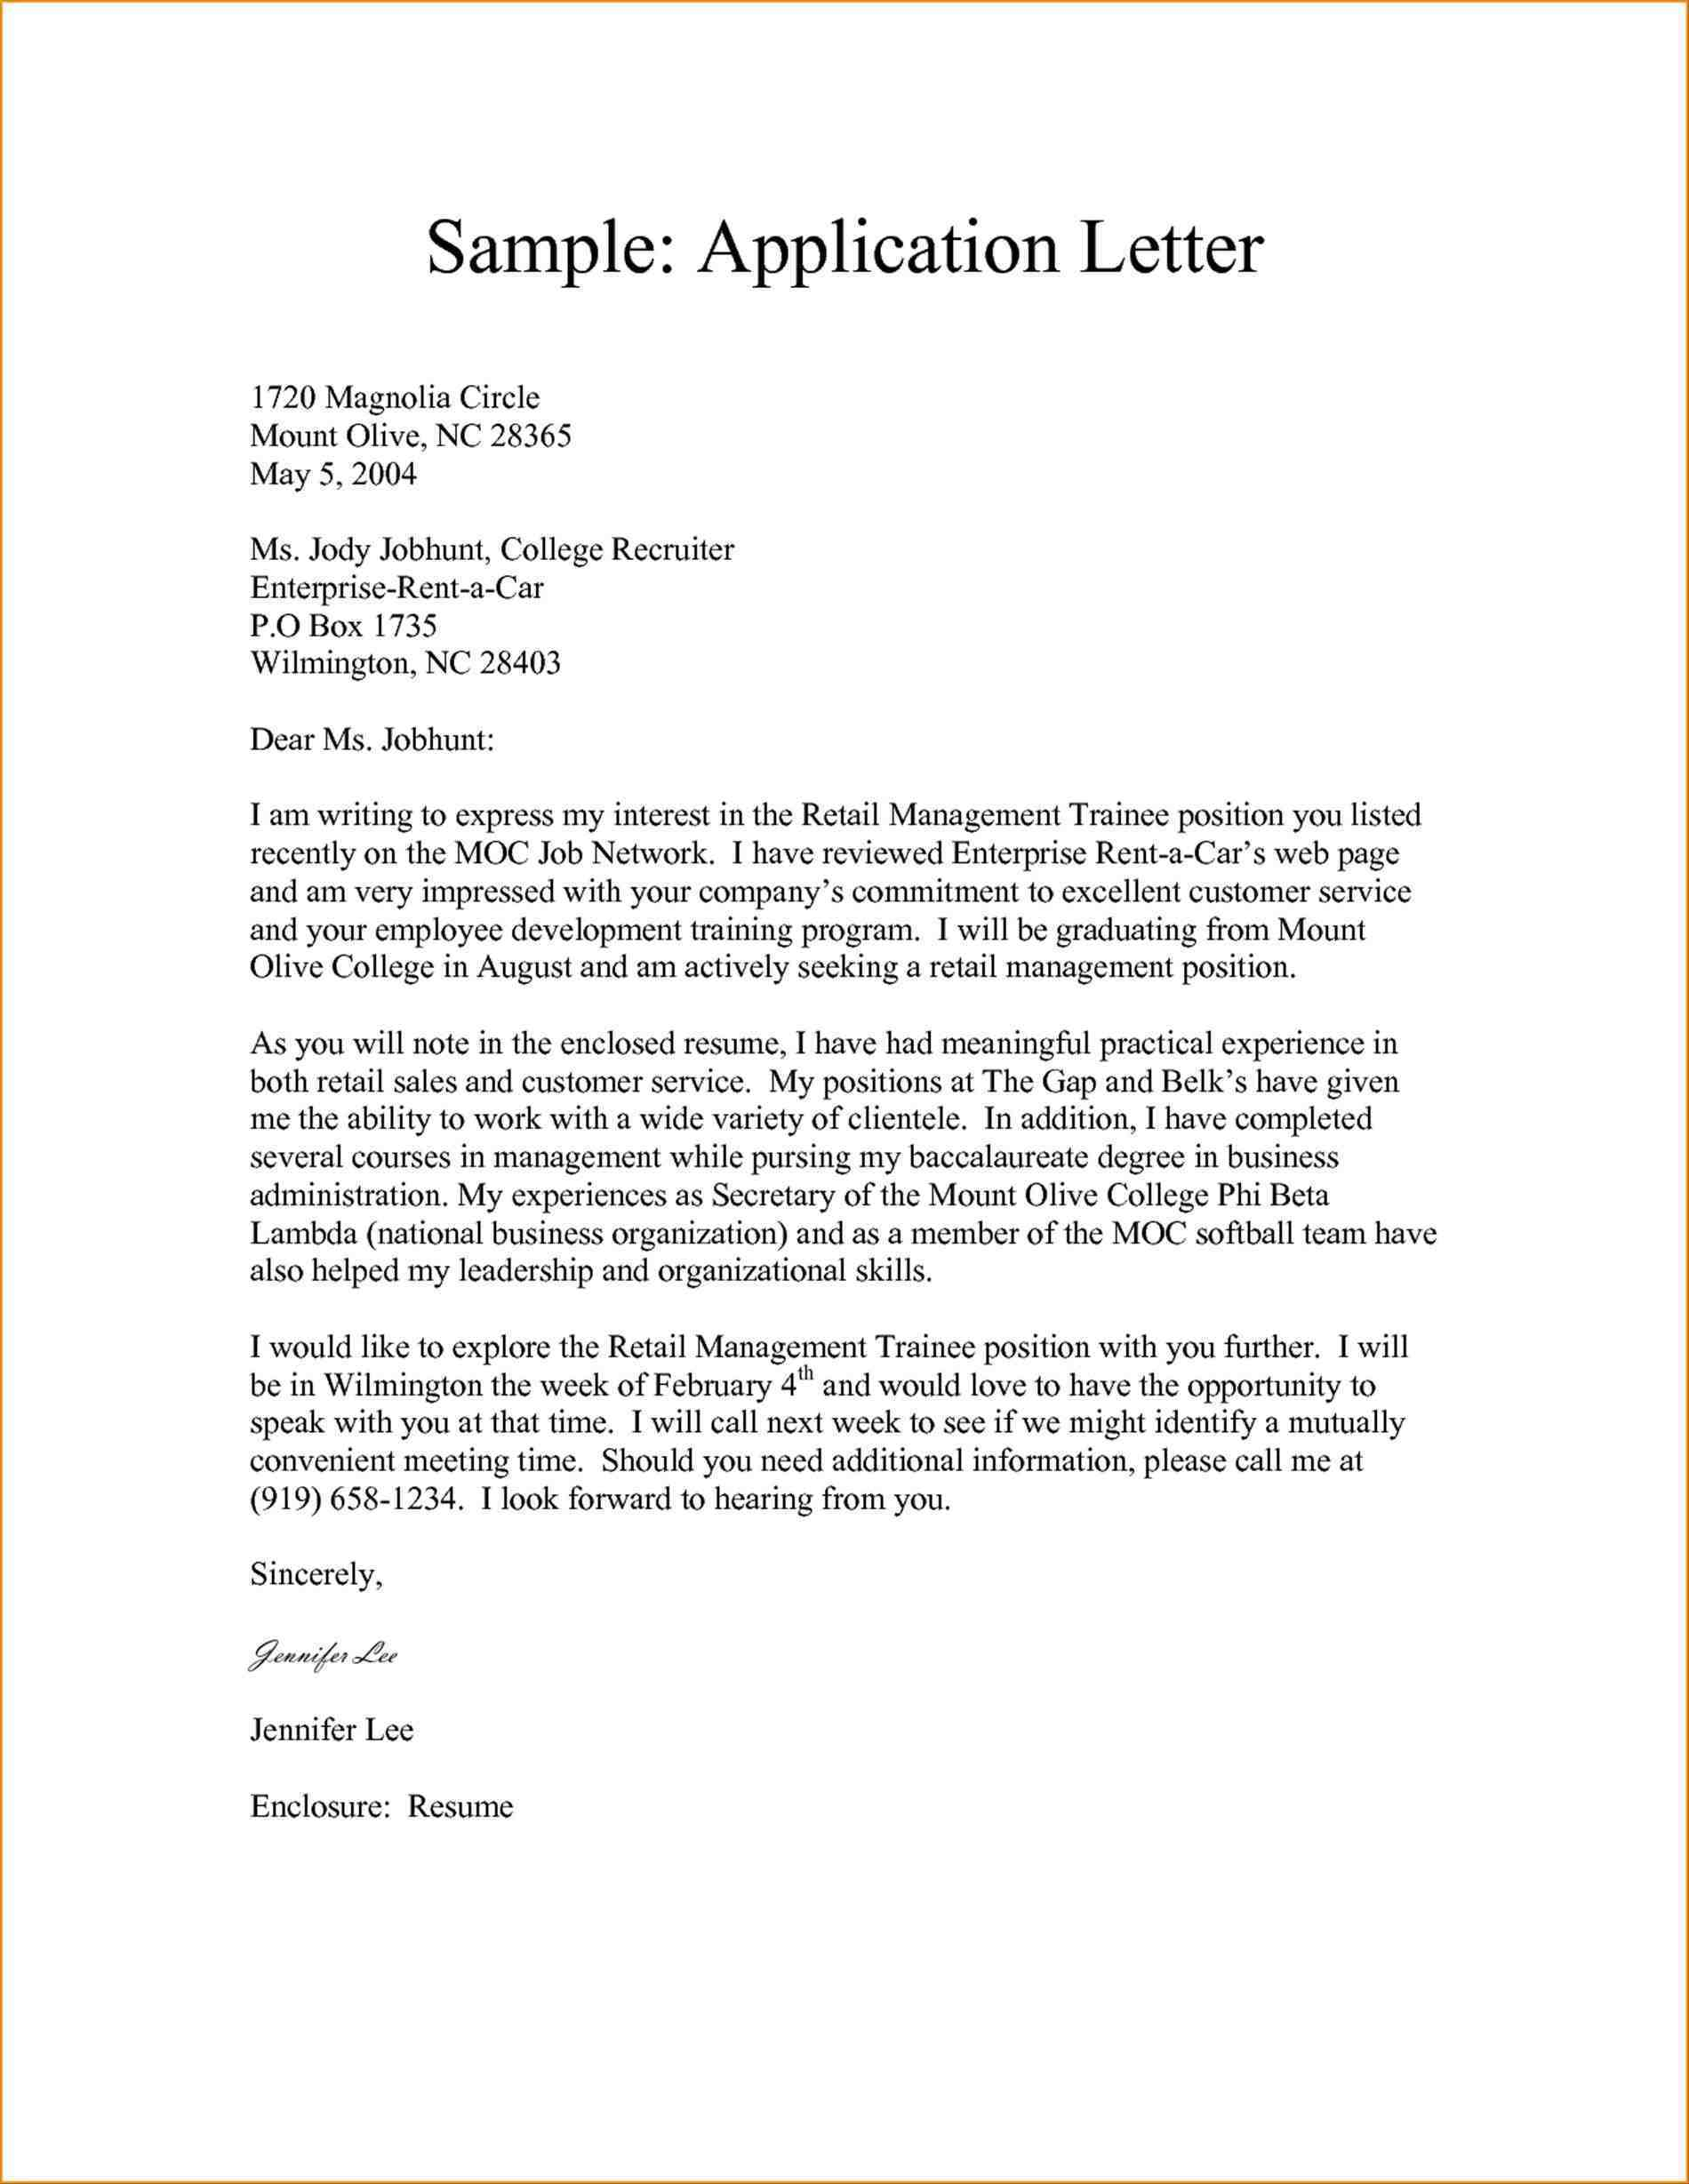 Gym Membership Cancellation Letter Template Free - Termination Letter for Absconding Employee Acurnamedia